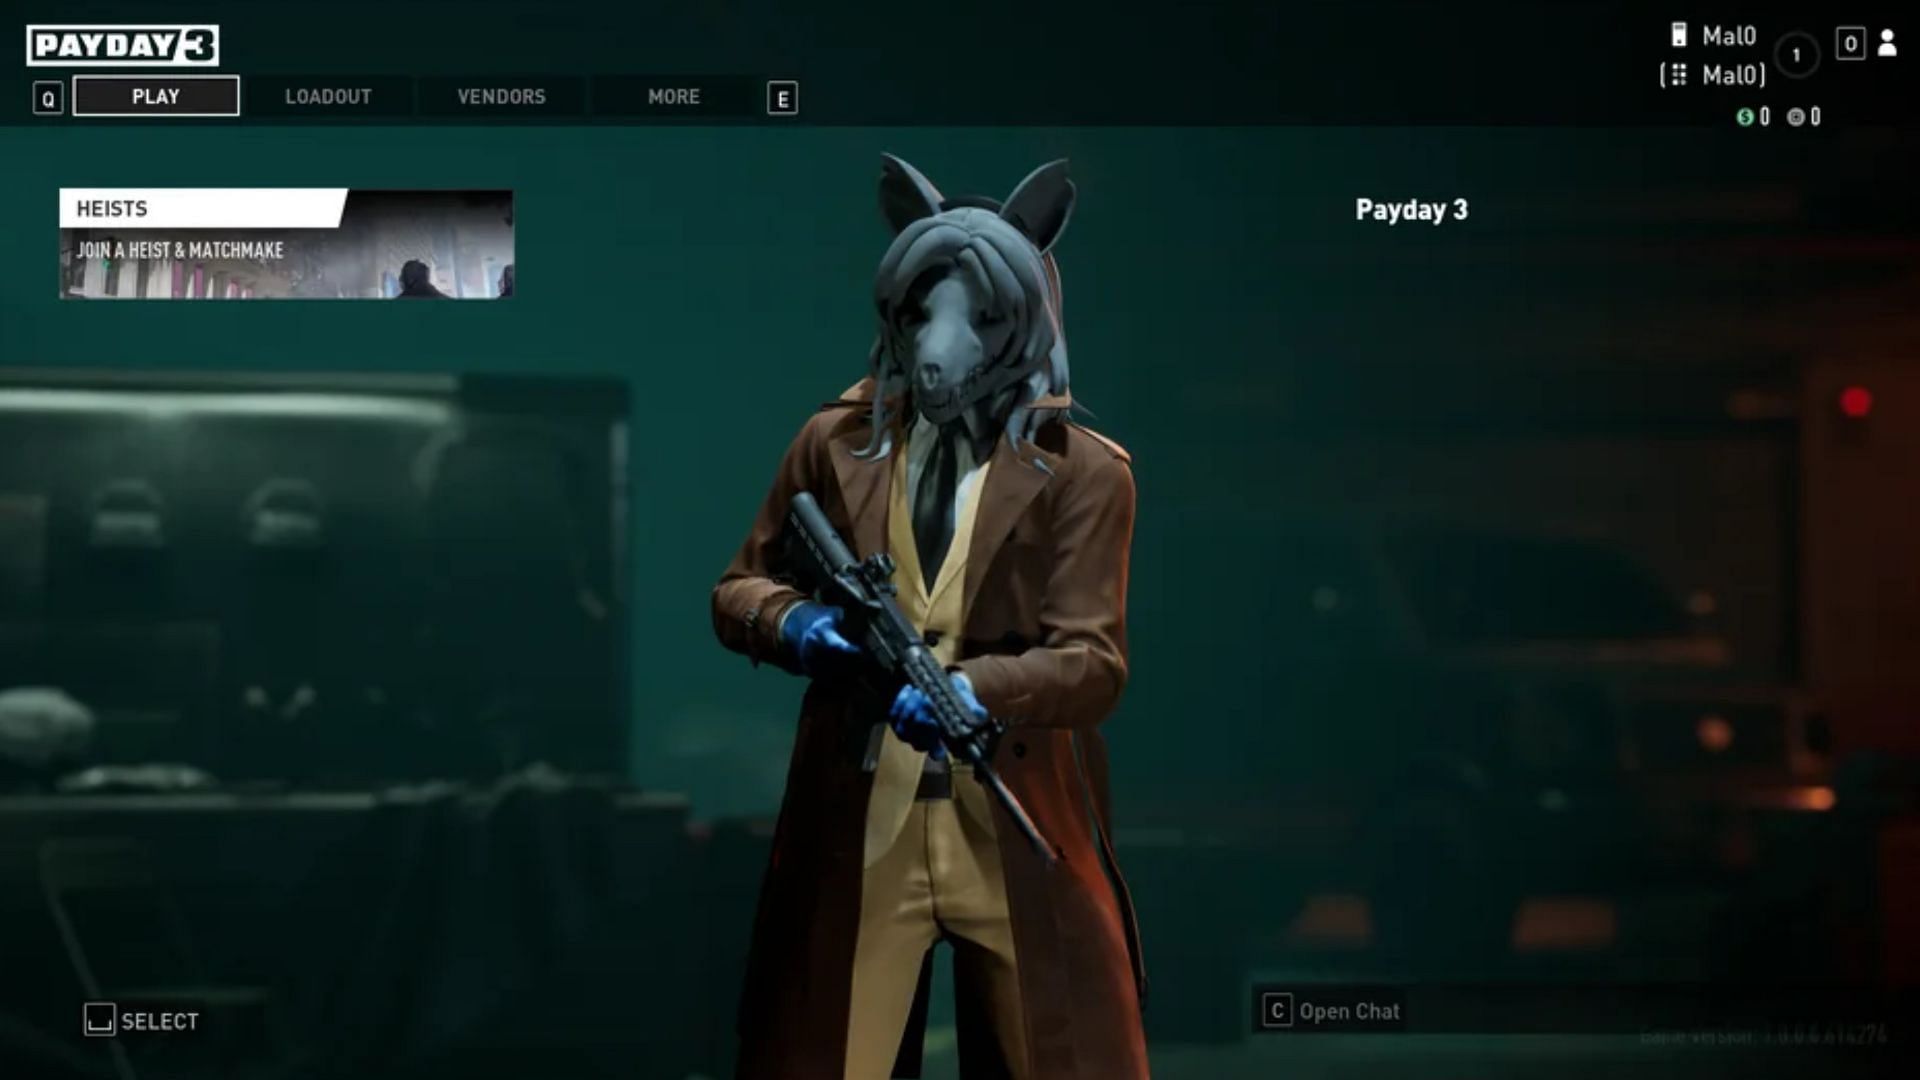 PAYDAY 2 mods and tools, Payday Wiki